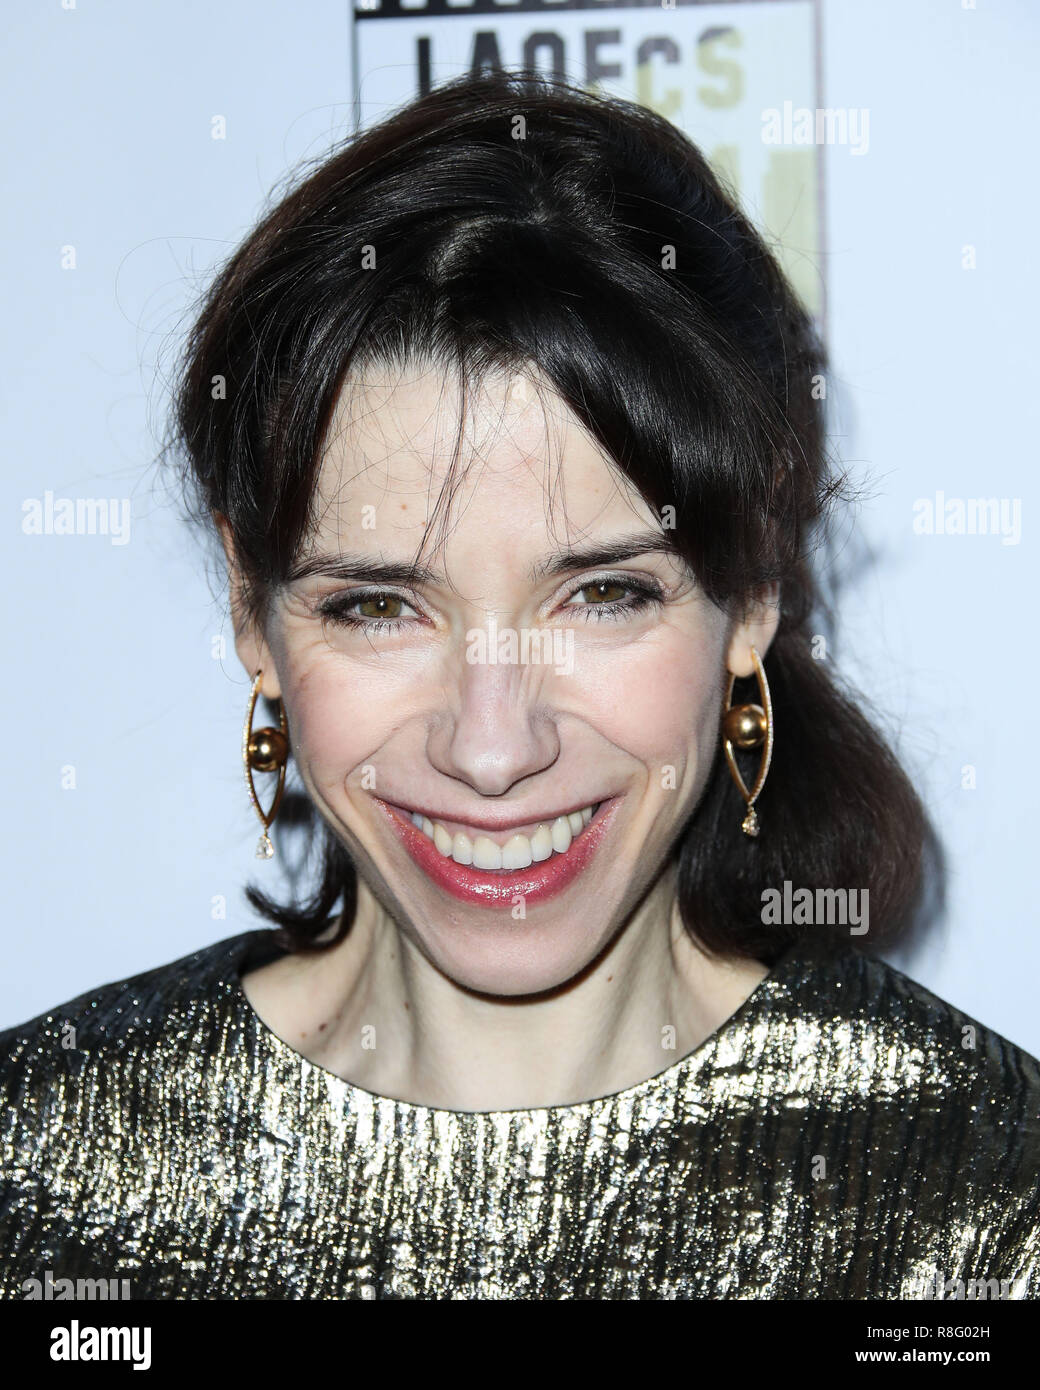 HOLLYWOOD, LOS ANGELES, CA, USA - JANUARY 10: Sally Hawkins at The Inaugural Los Angeles Online Film Critics Society Award Ceremony held at the Taglyan Complex on January 10, 2018 in Hollywood, Los Angeles, California, United States. (Photo by Xavier Collin/Image Press Agency) Stock Photo